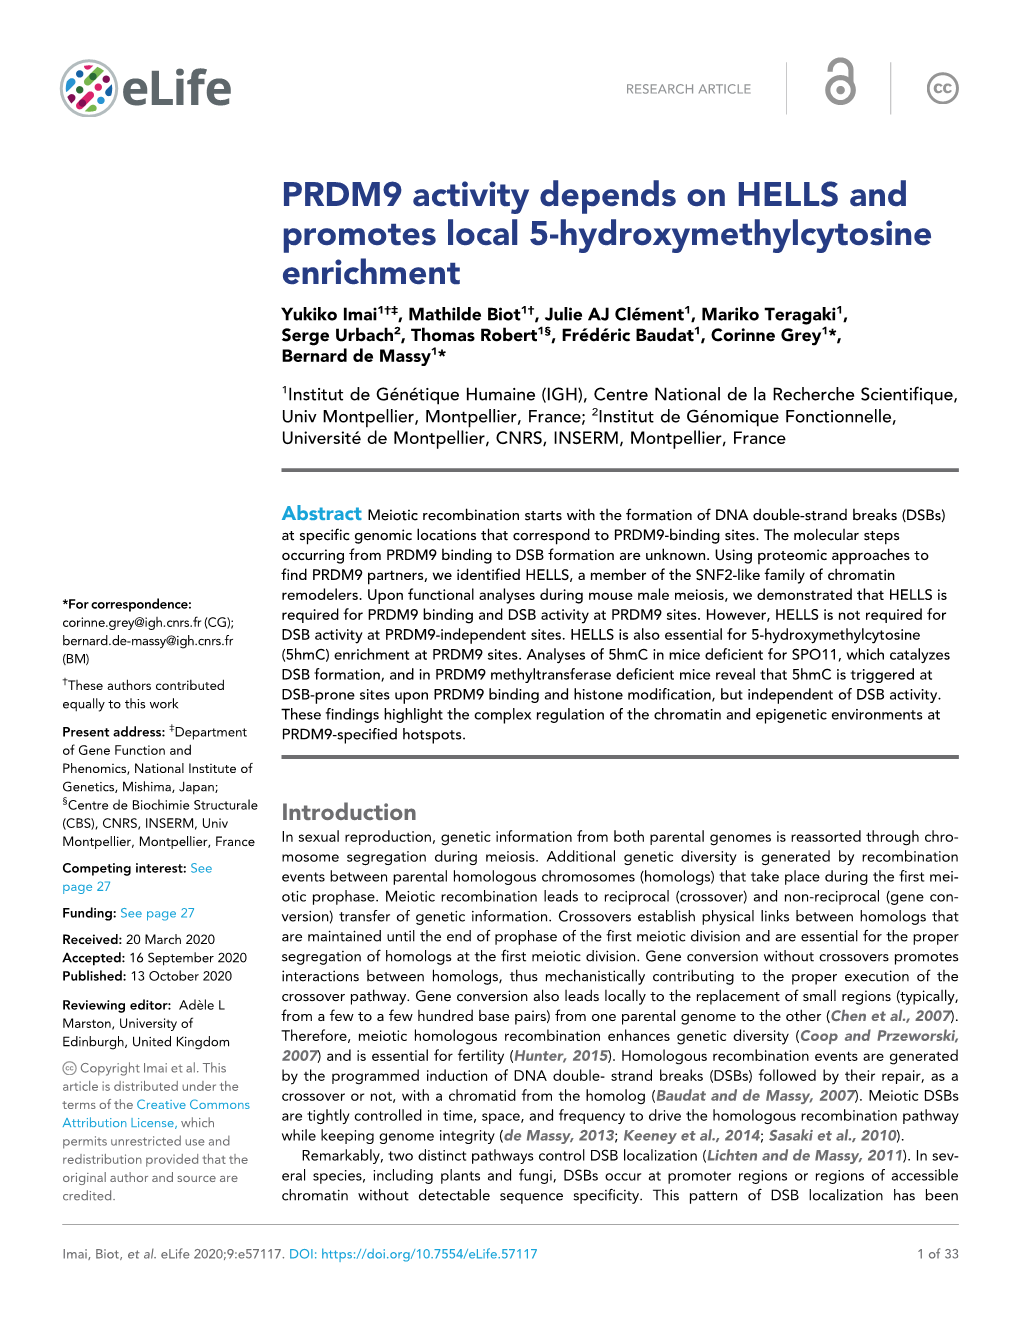 PRDM9 Activity Depends on HELLS and Promotes Local 5